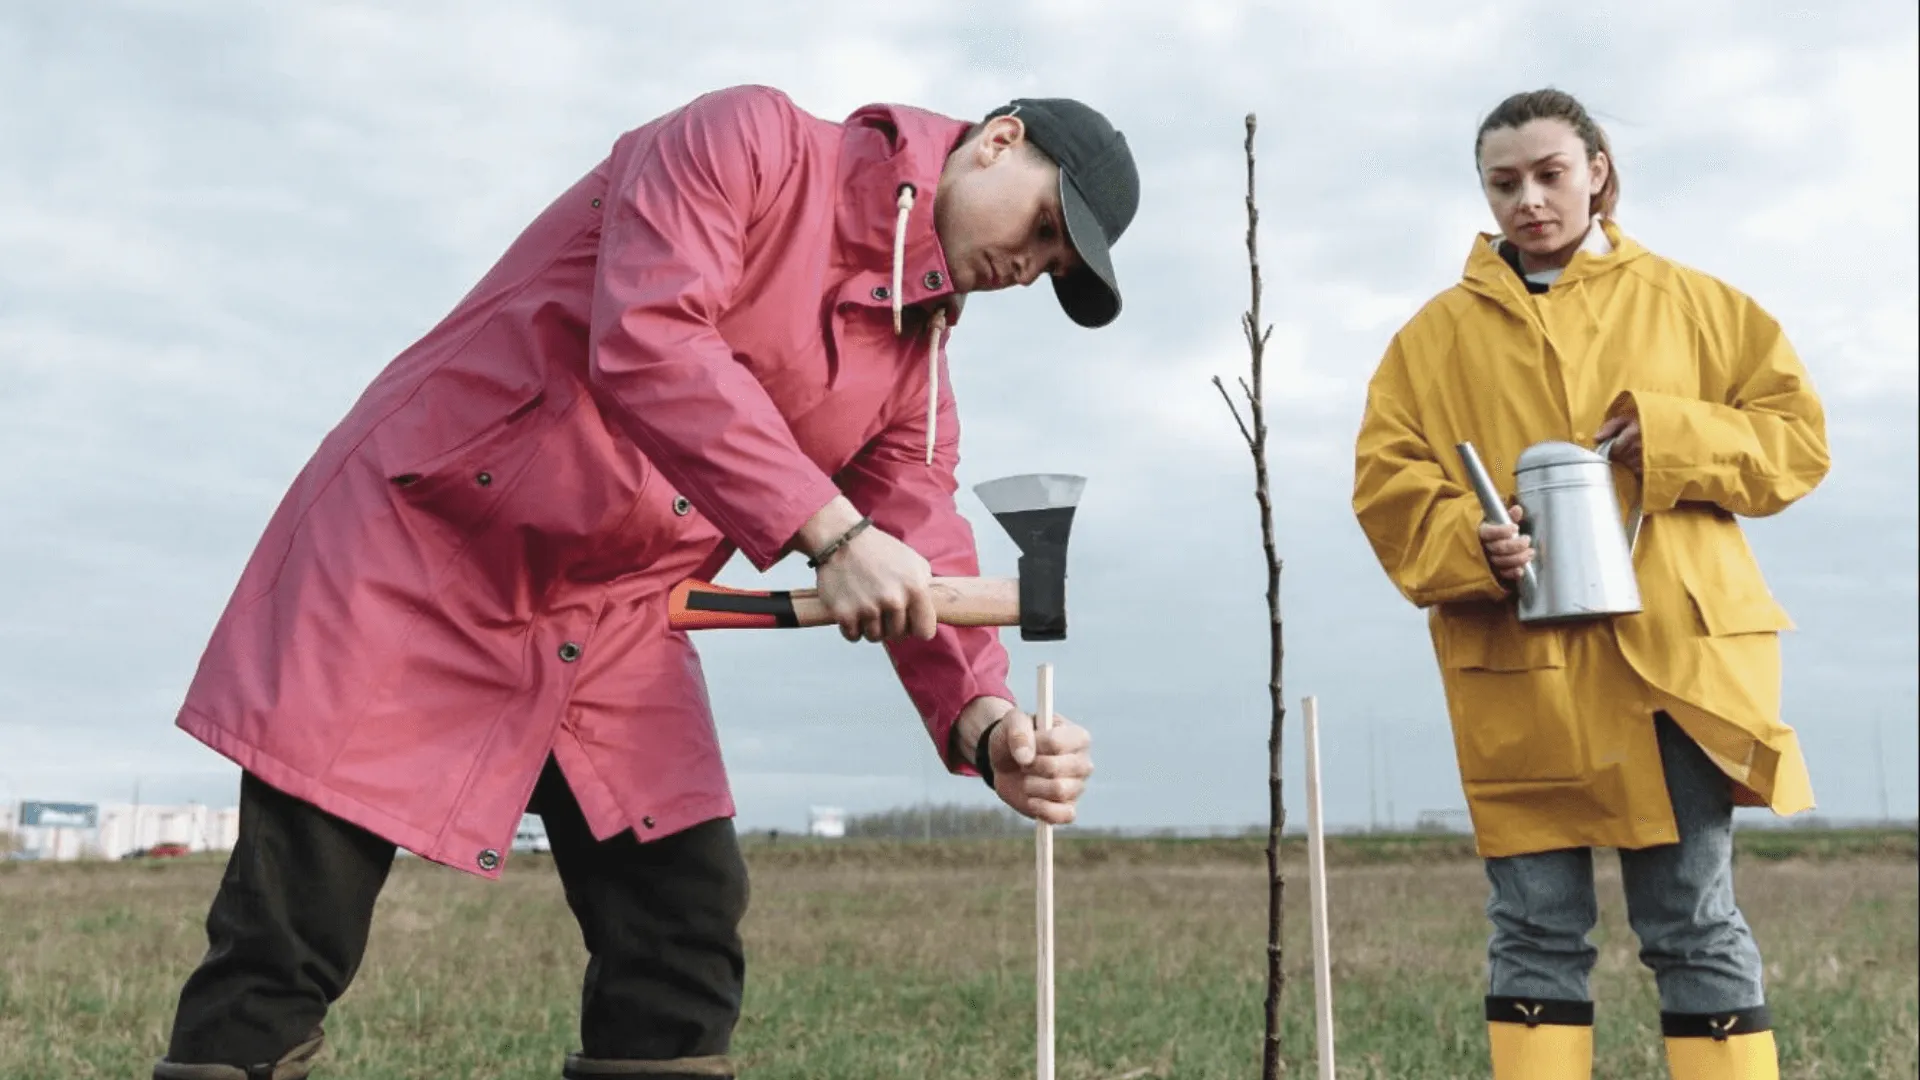 man in a red raincoat planting a tree while holding an axe with a woman in a yellow raincoat standing behind him, holding a watering can